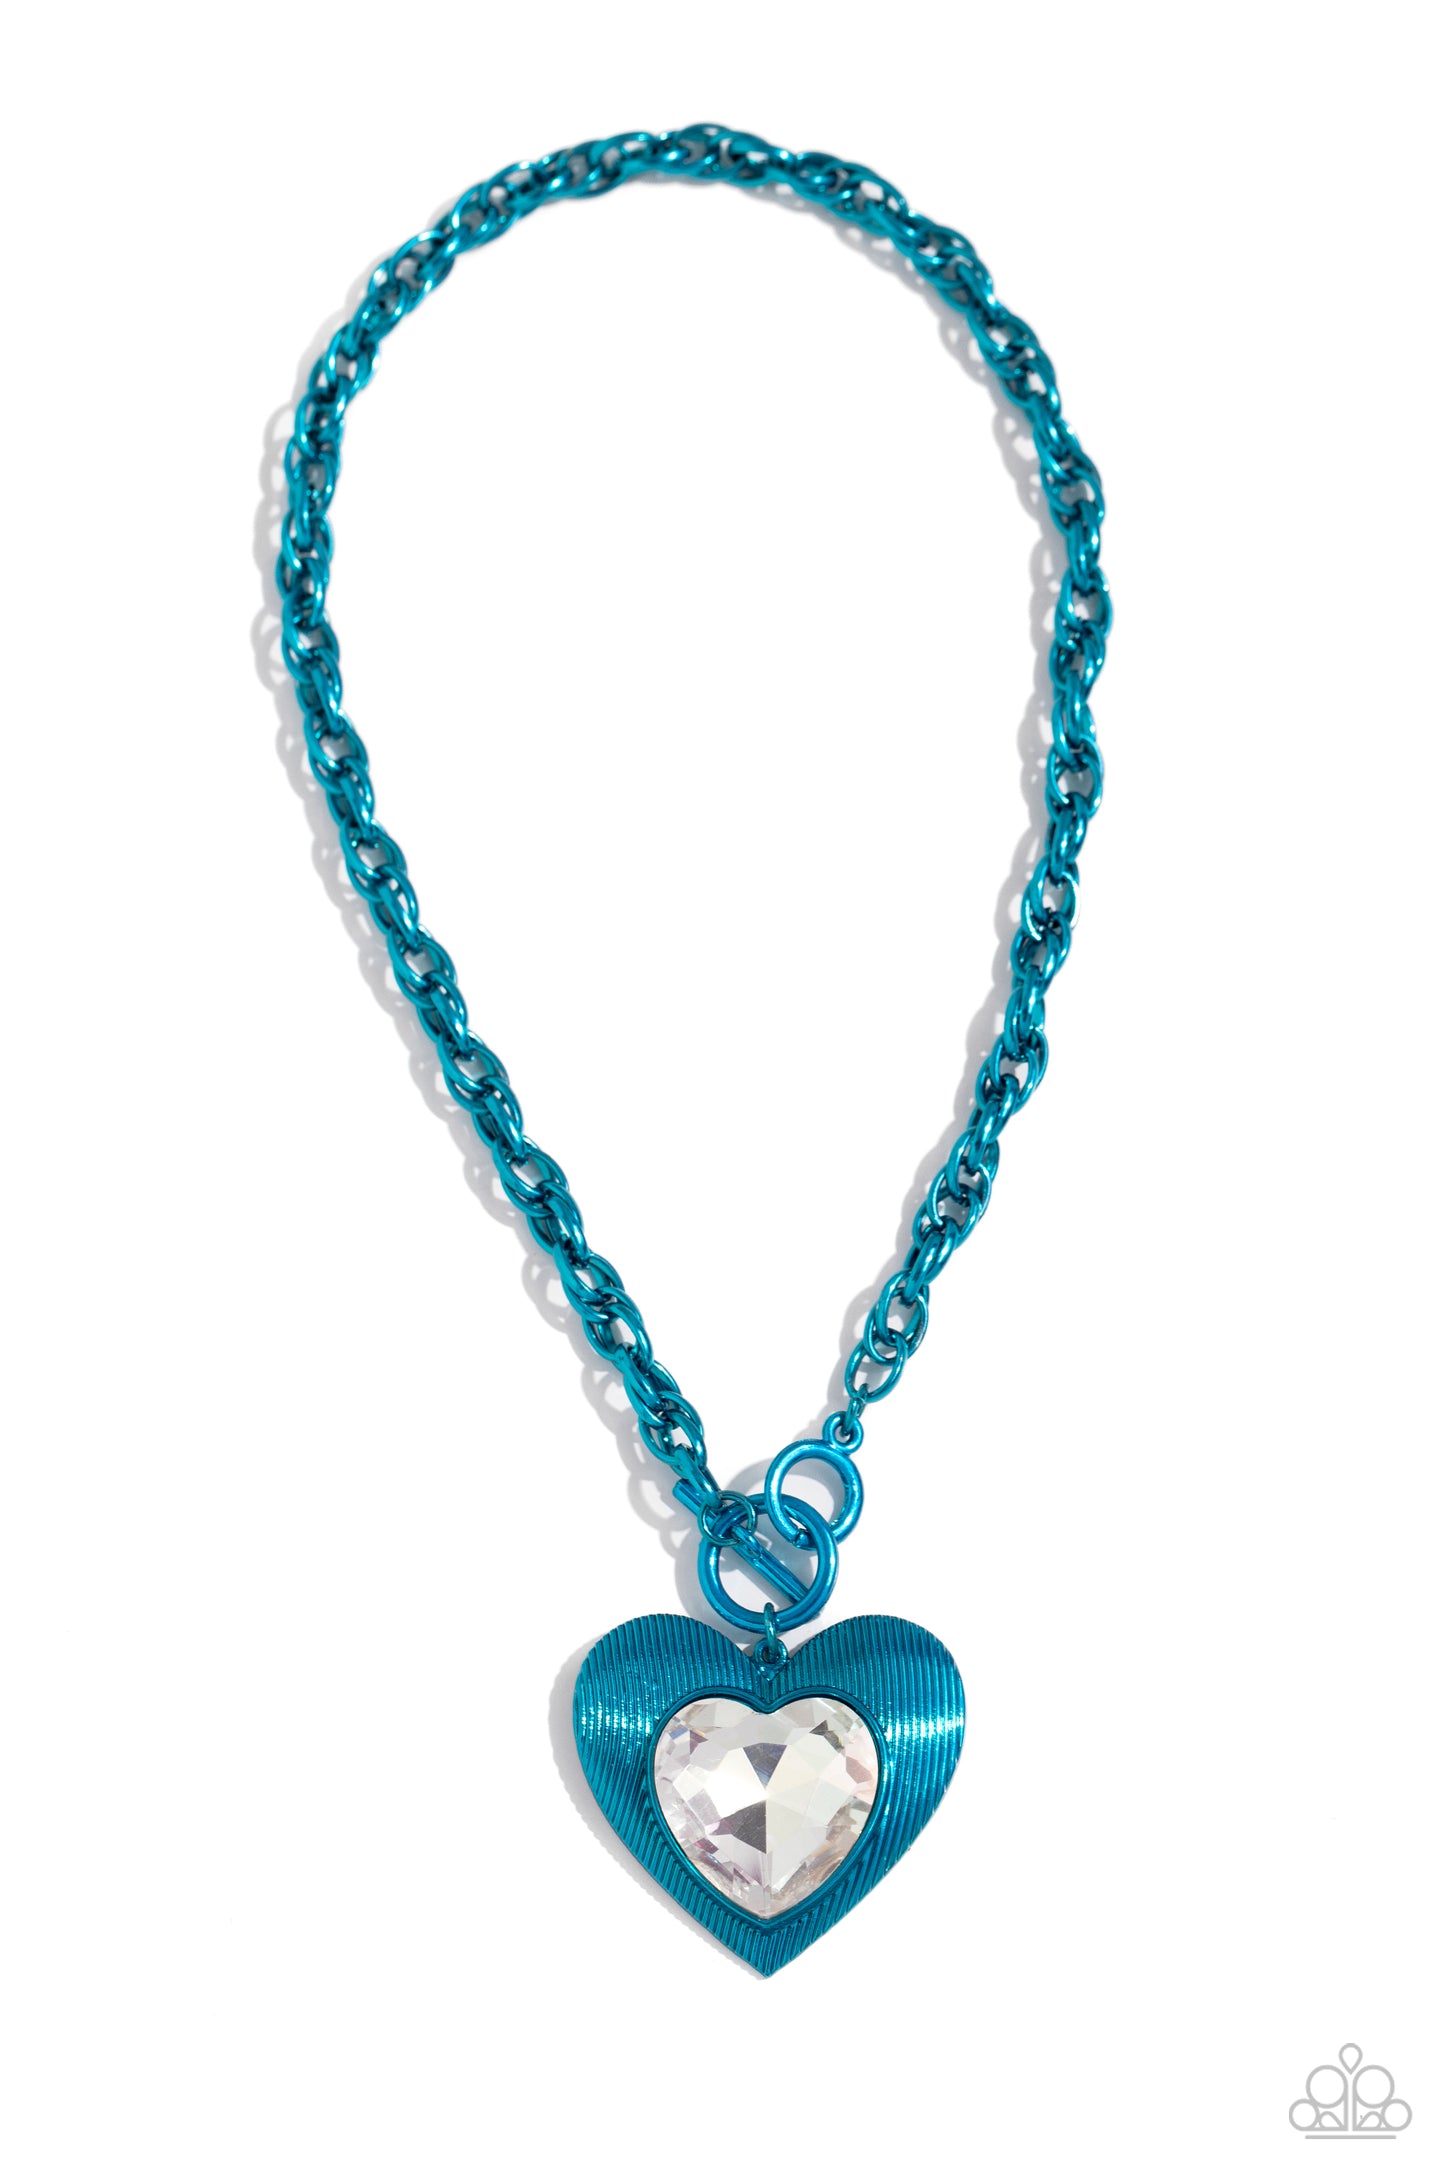 Modern Matchup Blue Heart Toggle Necklace - Paparazzi Accessories Bordered in linear textures, an oversized white heart gem is pressed into an electric blue heart frame below the collar. The flirtatious pendant attaches to a thick, electric blue chain, resulting in a modern-inspired romance. Features a lariat closure. Sold as one individual necklace. Includes one pair of matching earrings. P2ST-BLXX-269XX